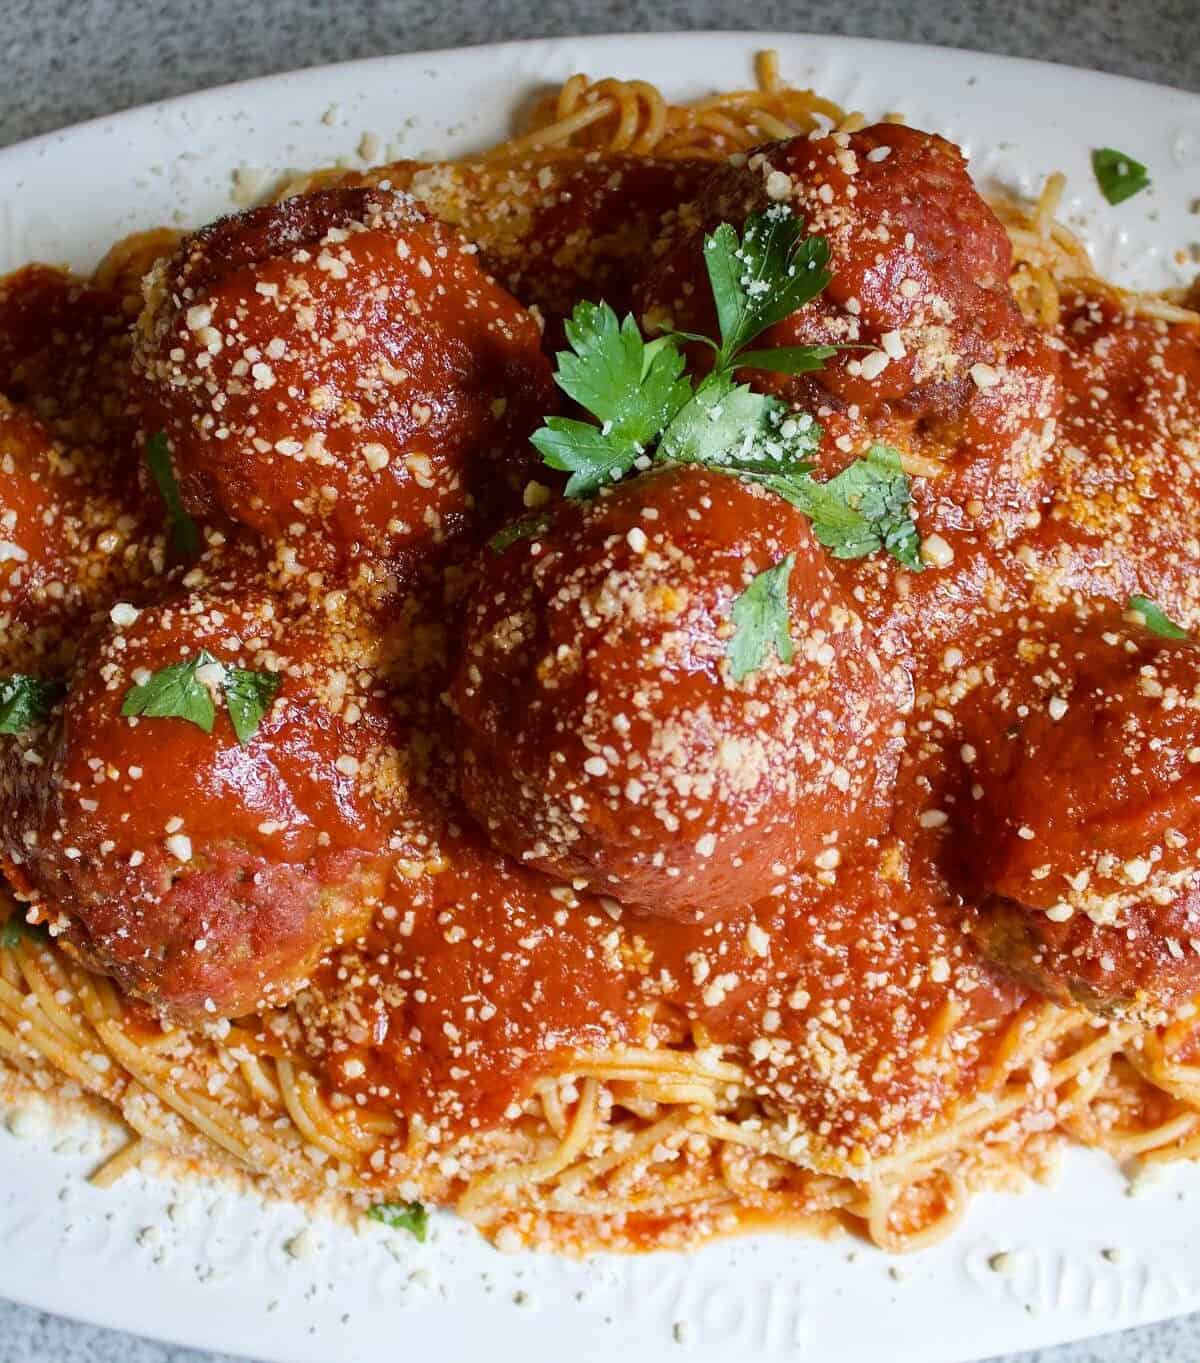  Give your guests a taste of Old Hollywood with these legendary meatballs named after the legendary Frank himself.